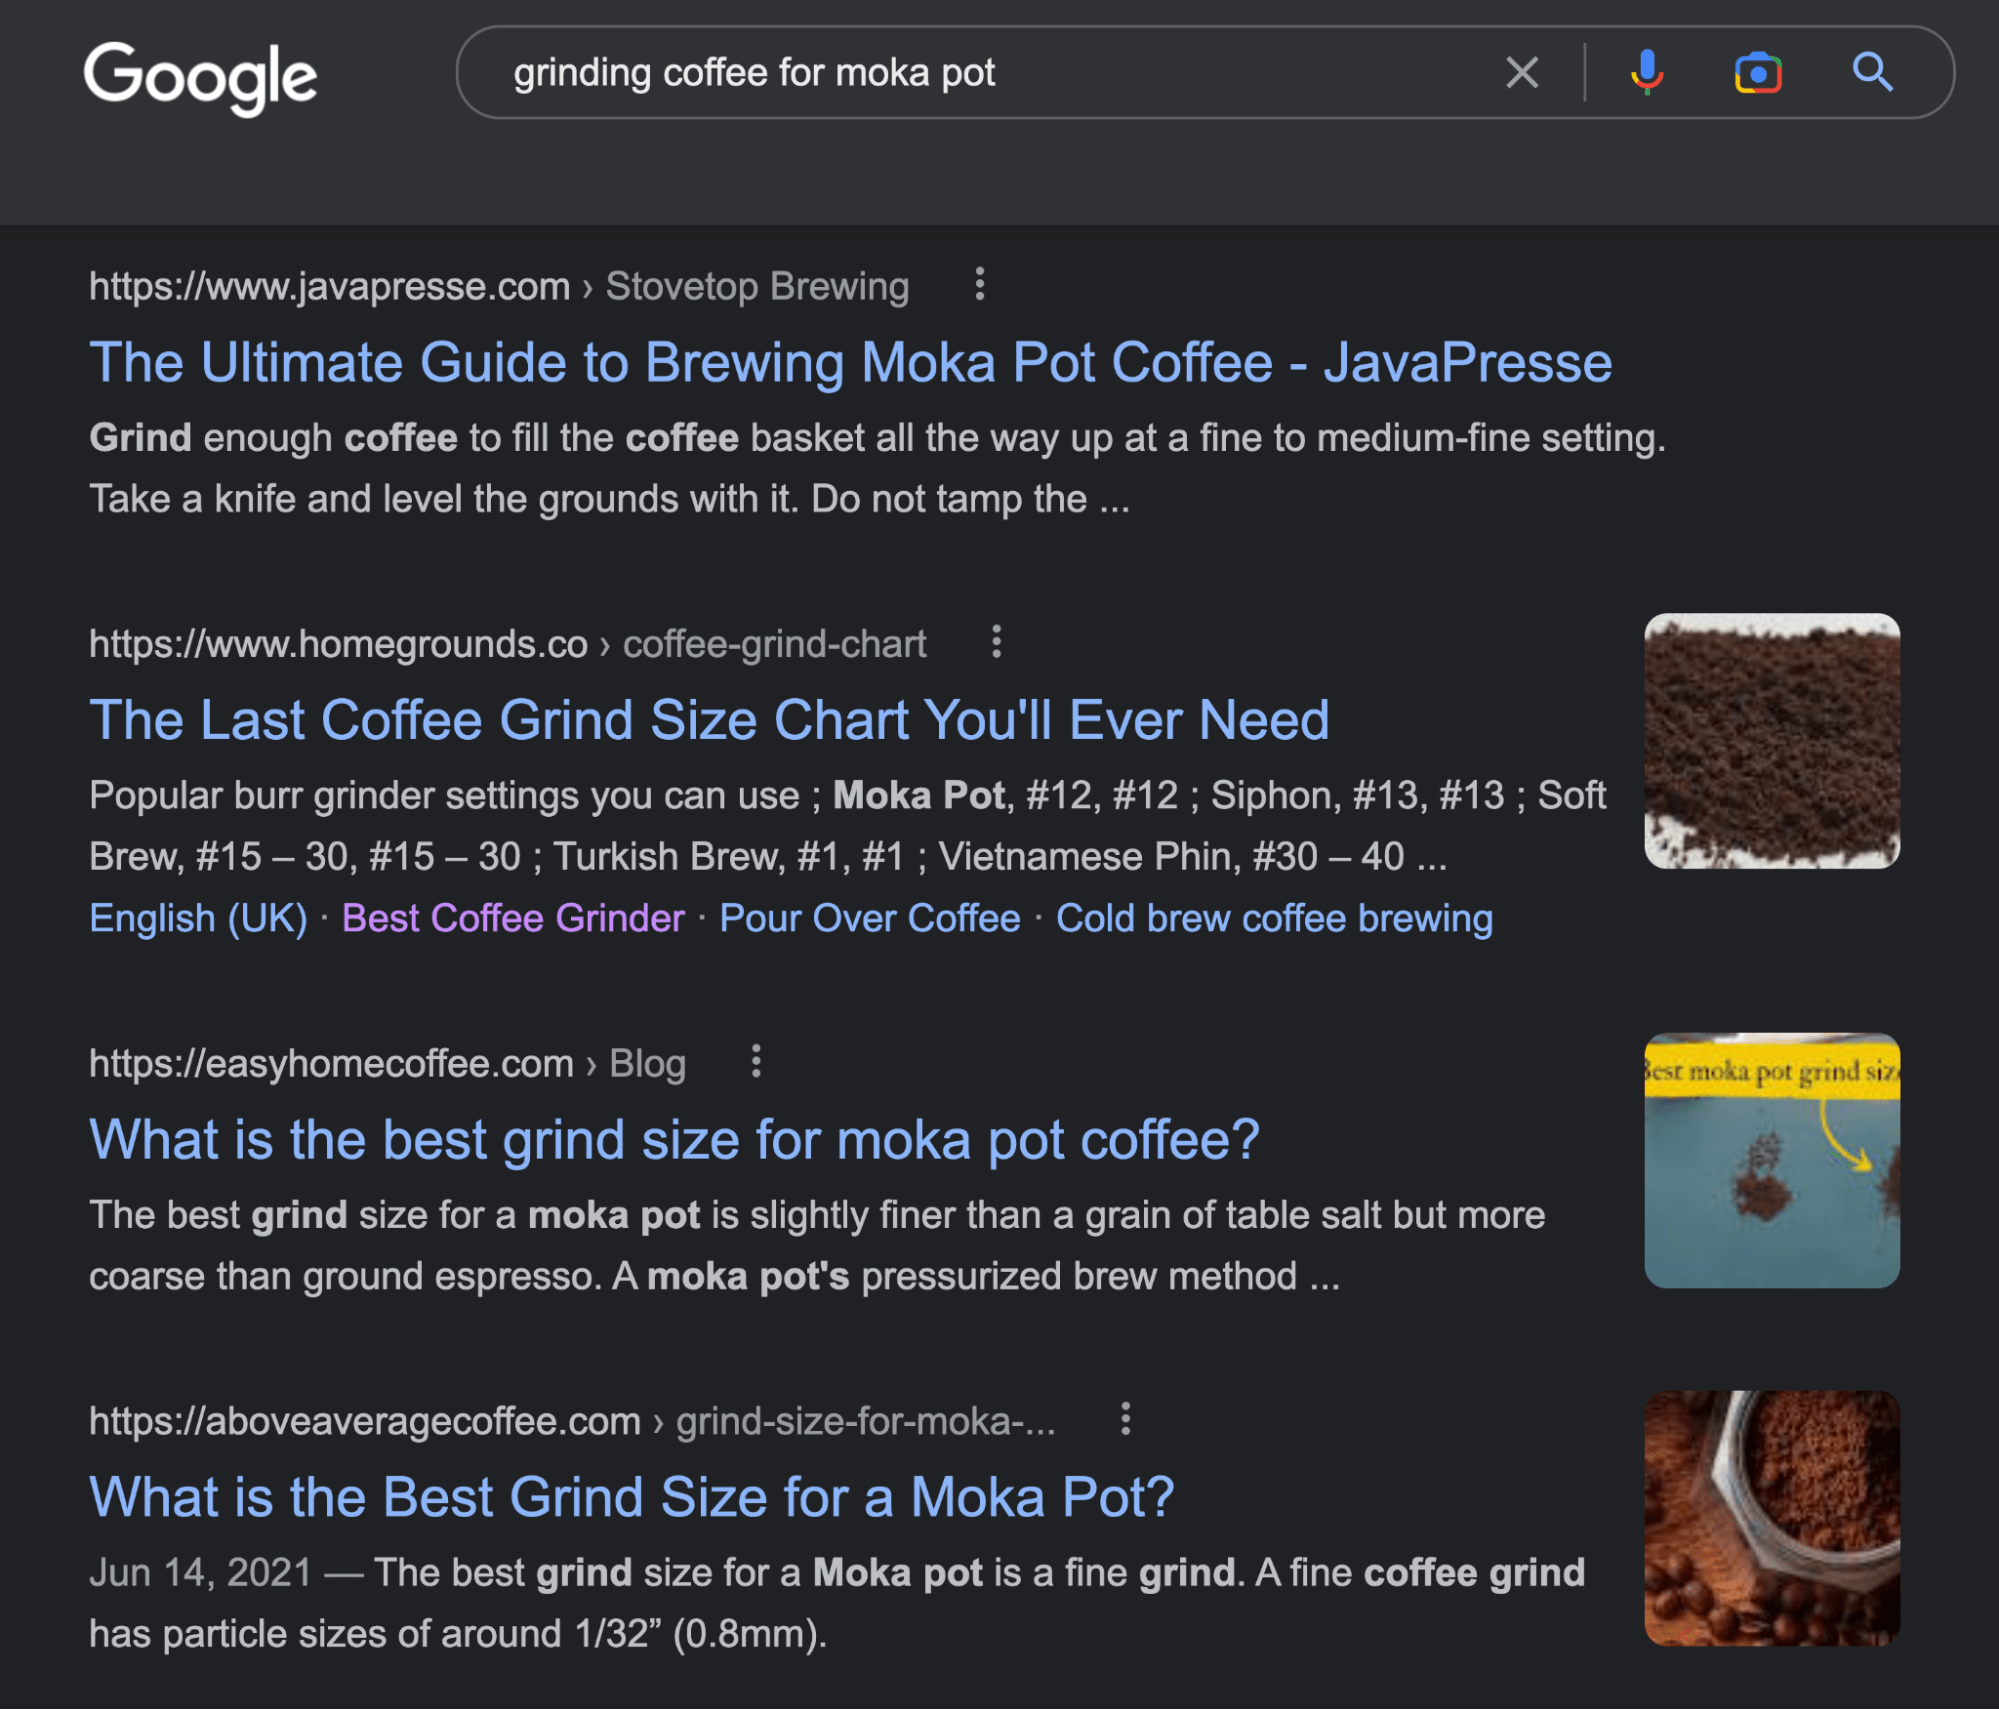 Google's SERP for "grinding coffee for moka pot" search query